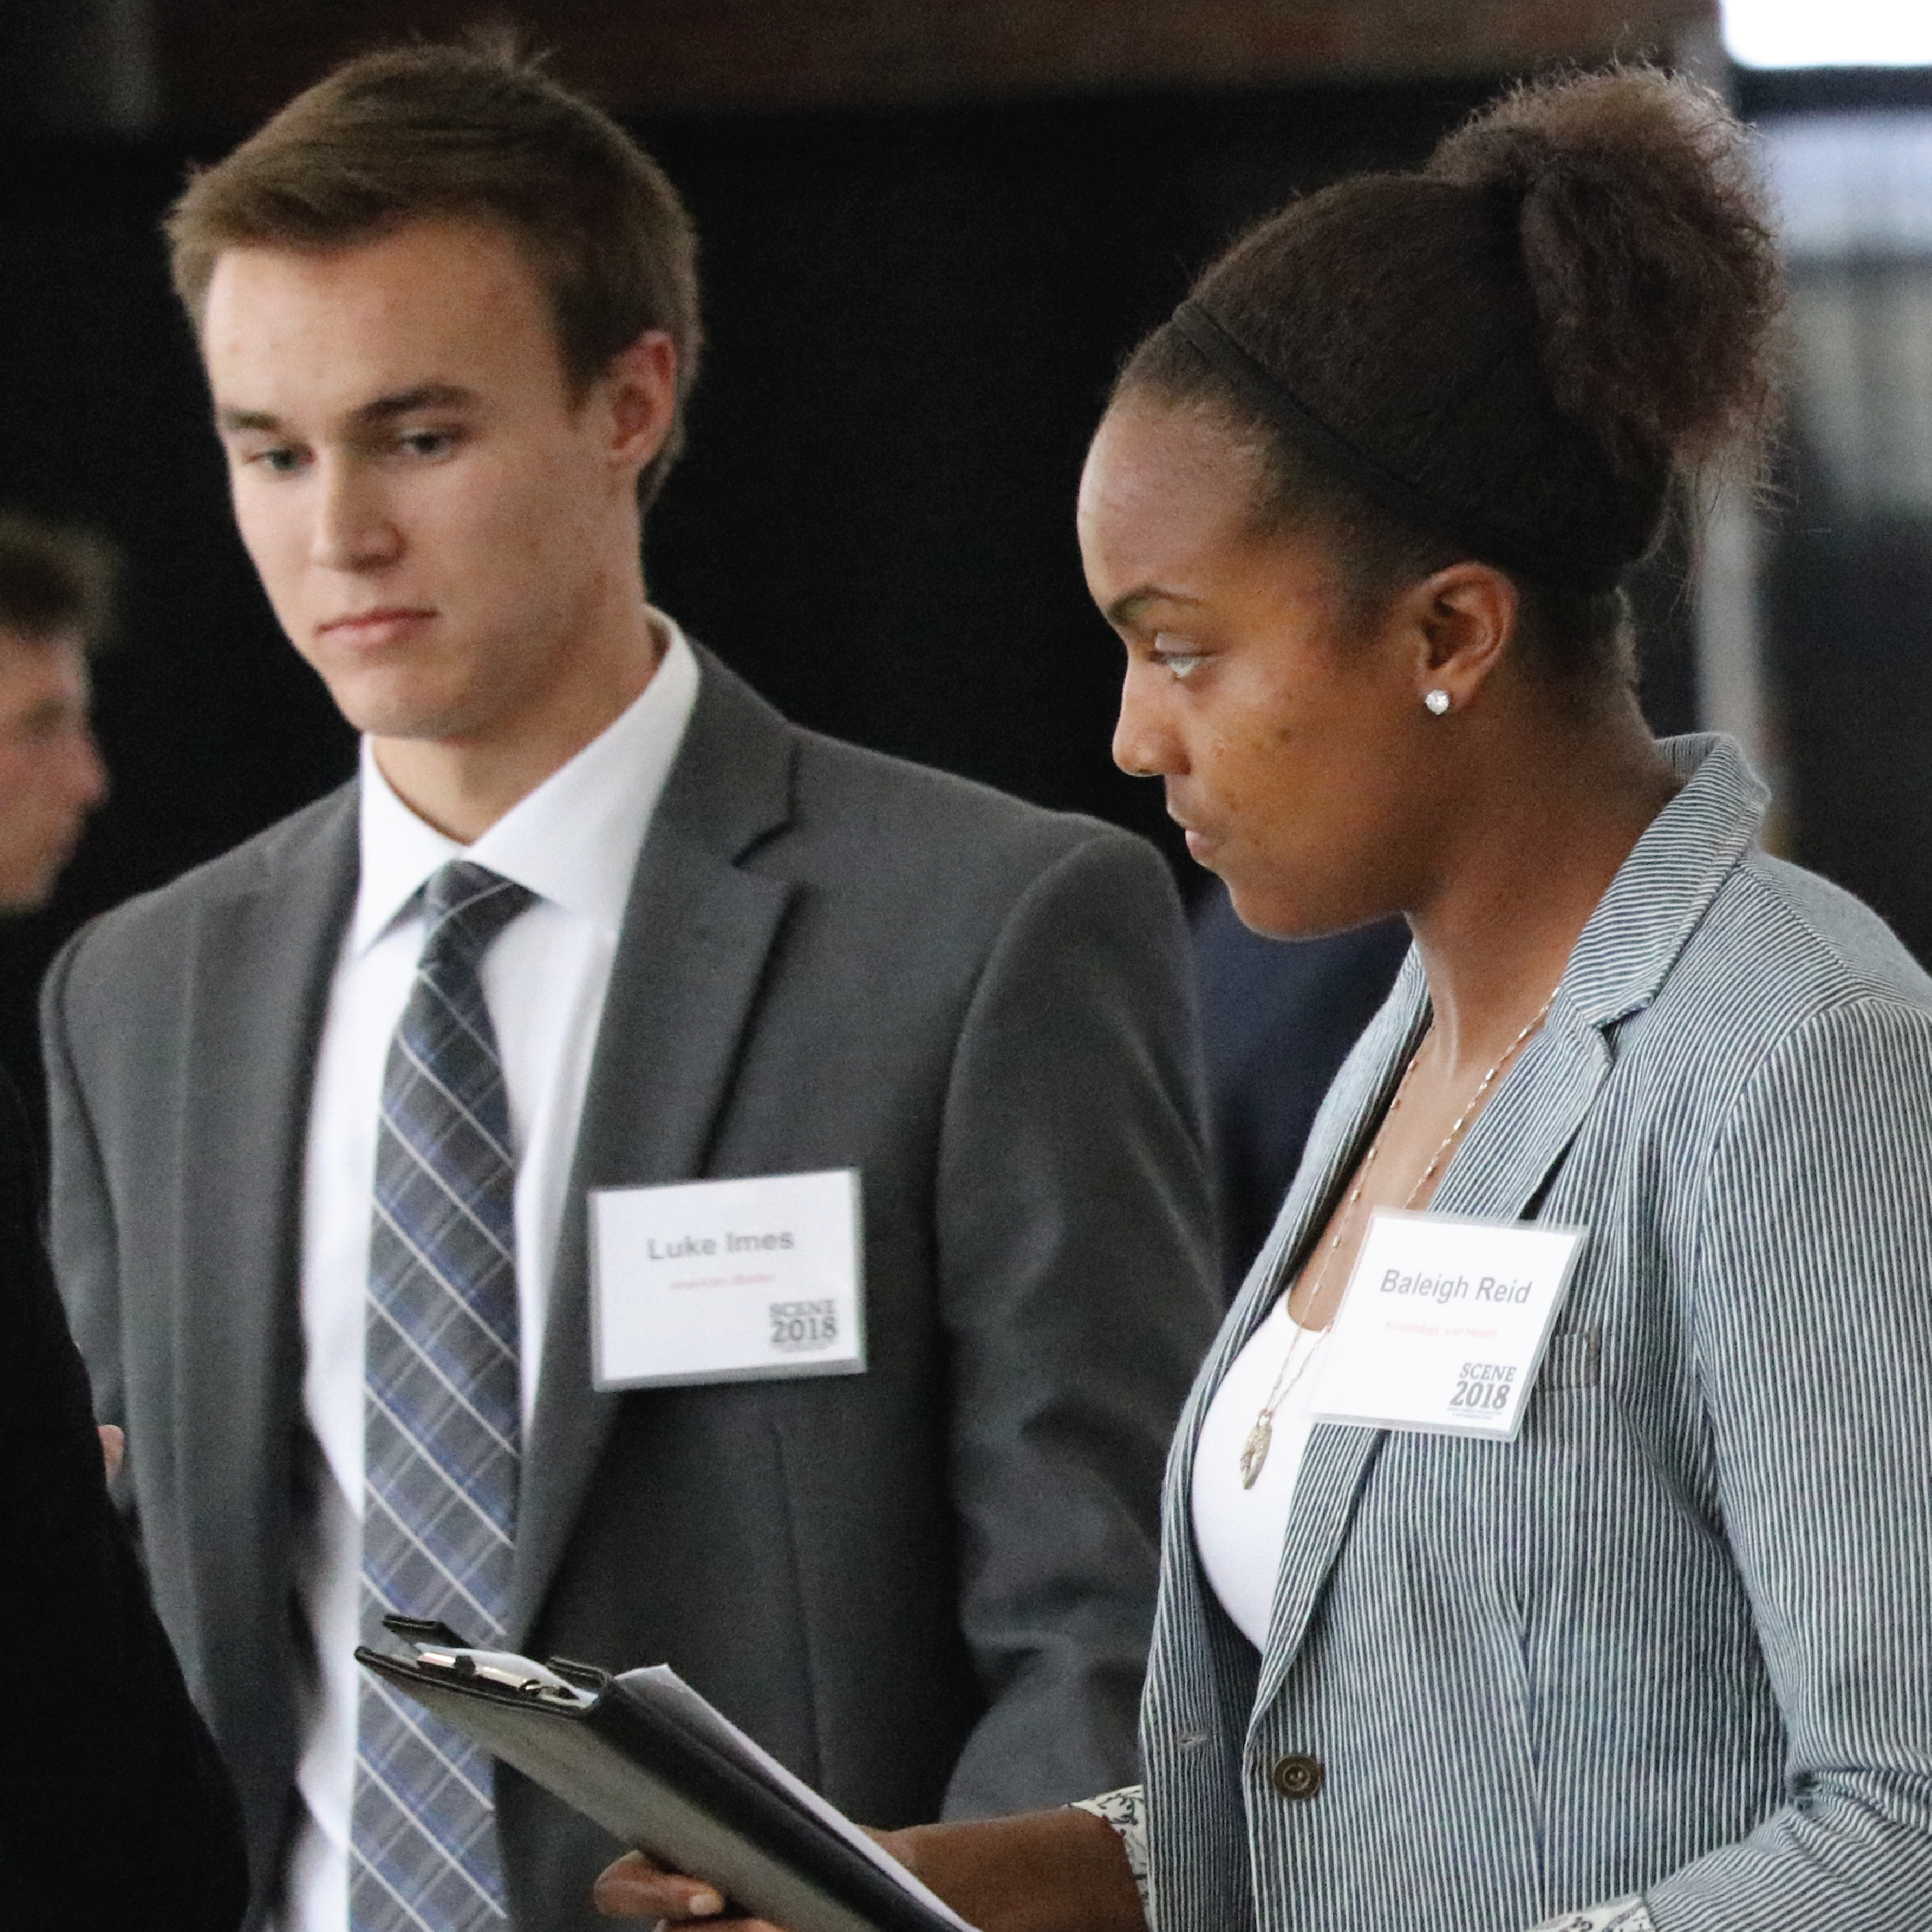 Two students dressed in suits stand in line to speak with employers.